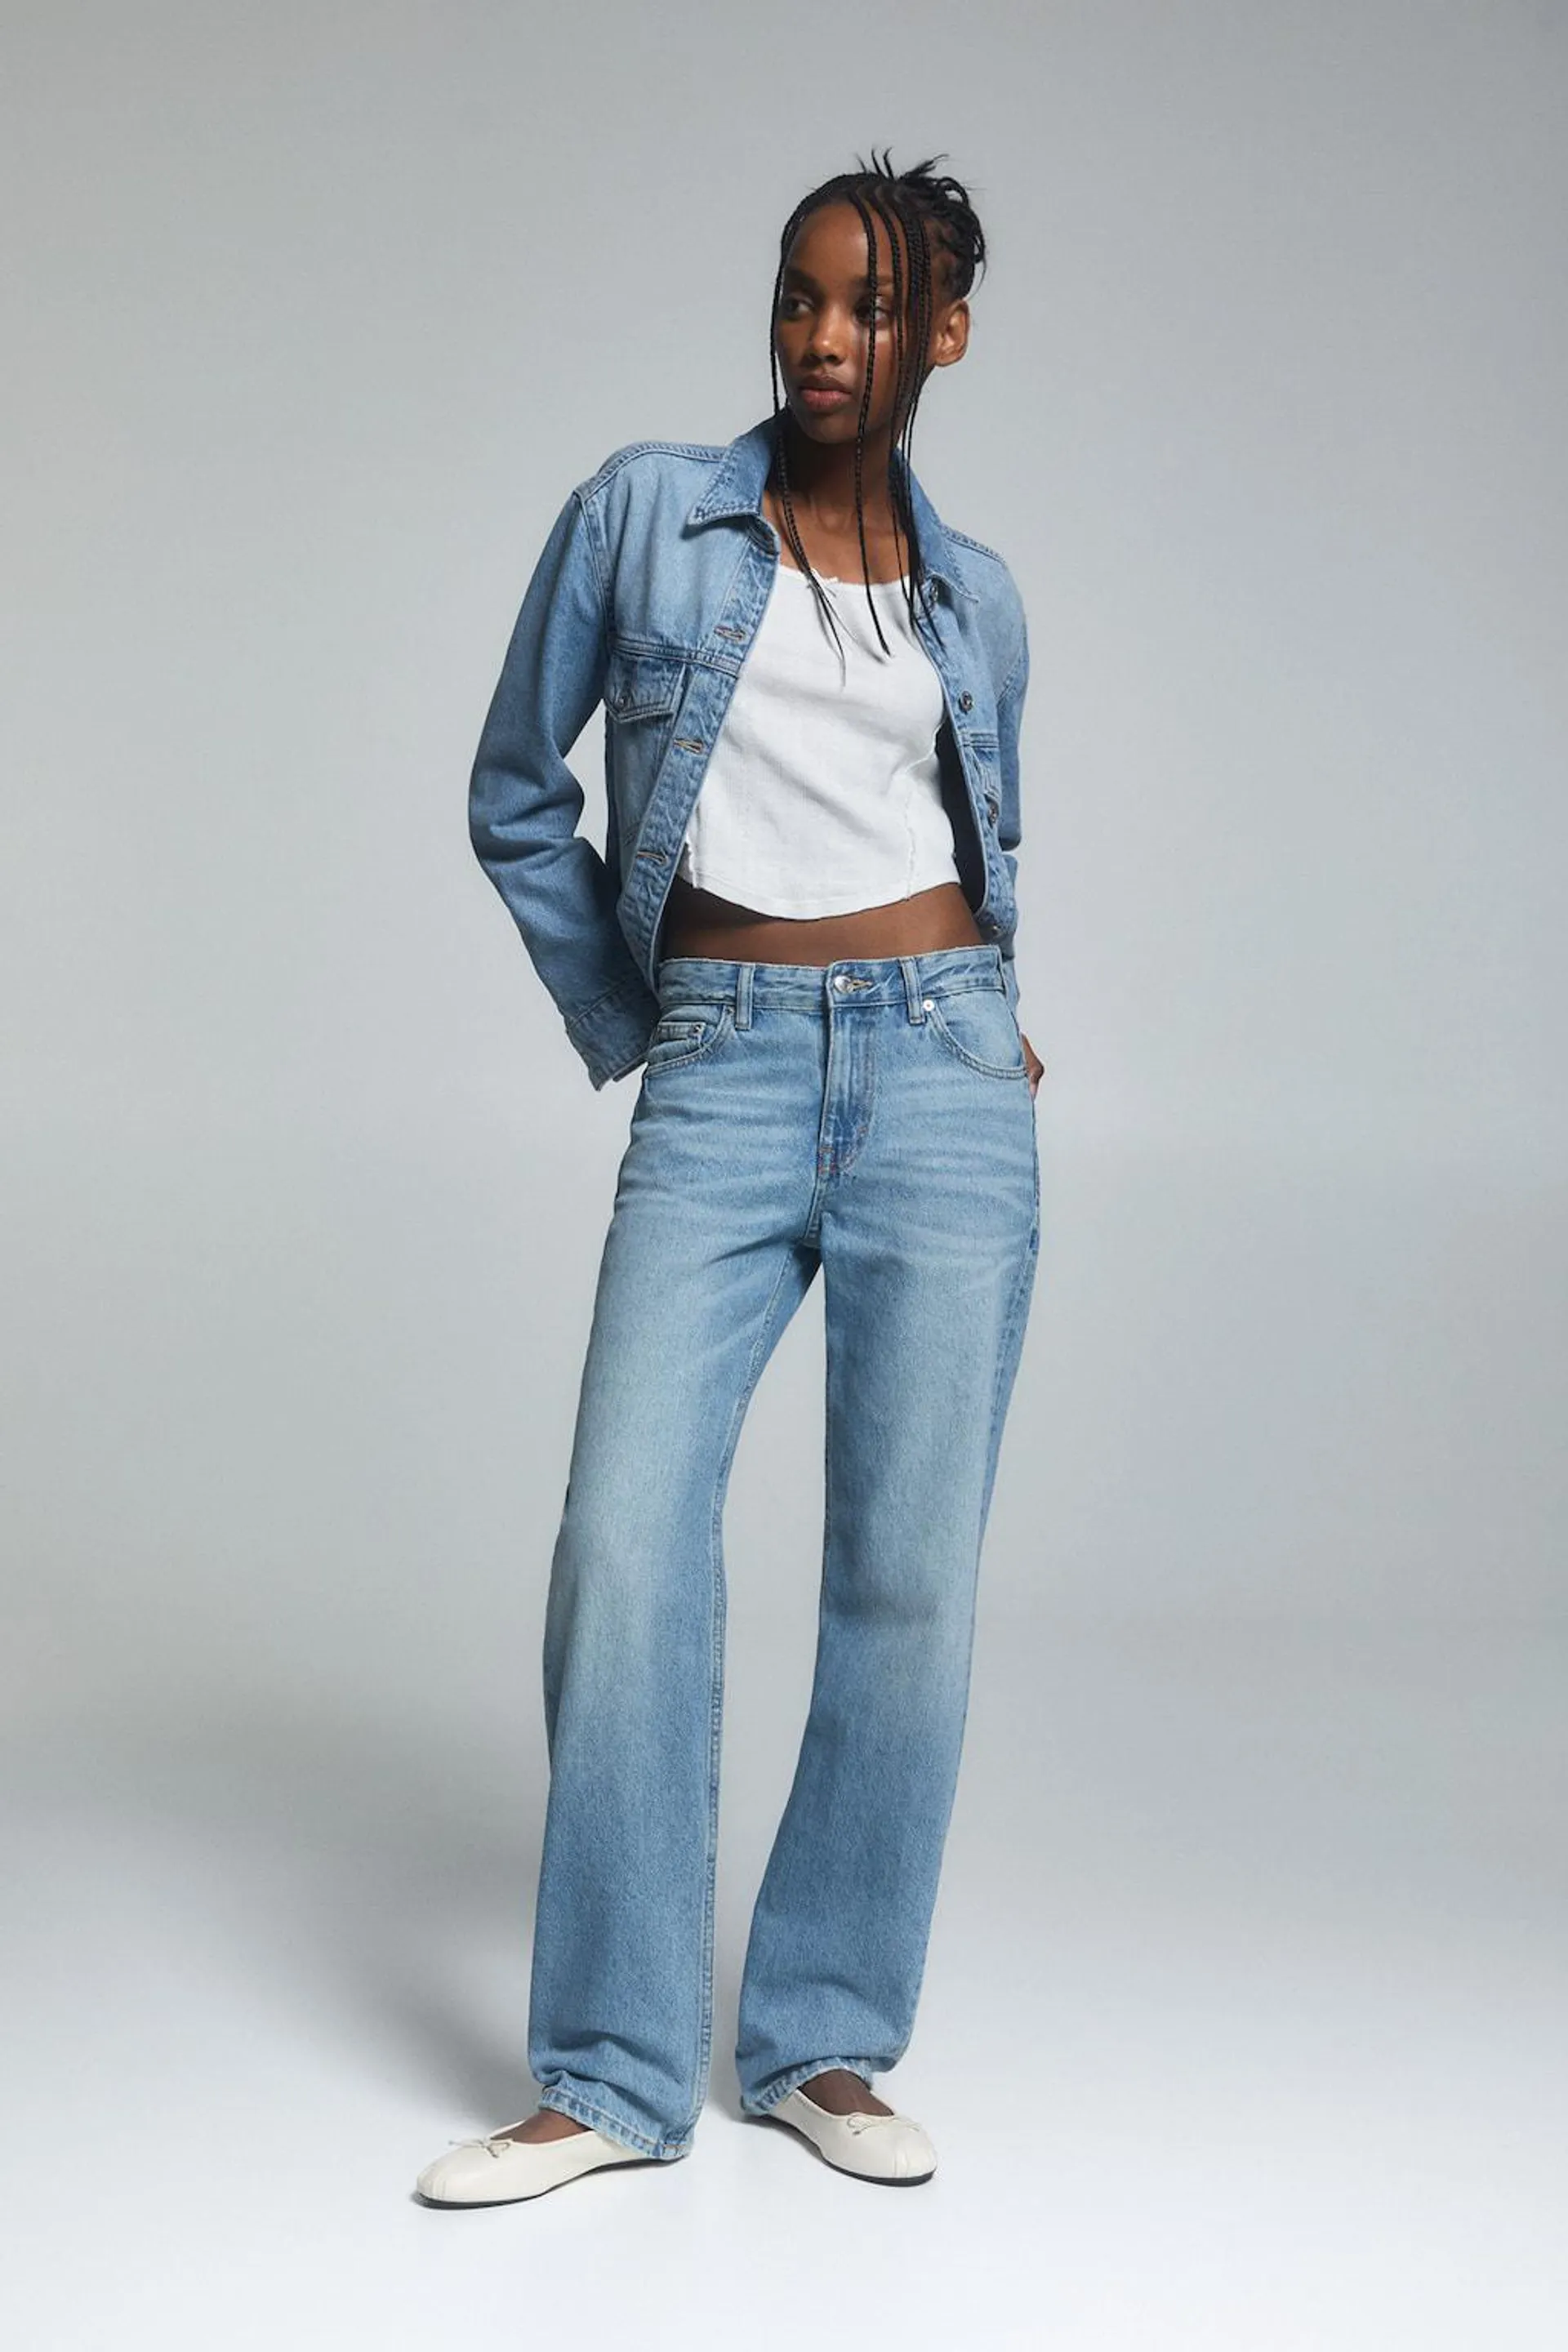 Straight model jeans met halfhoge taille